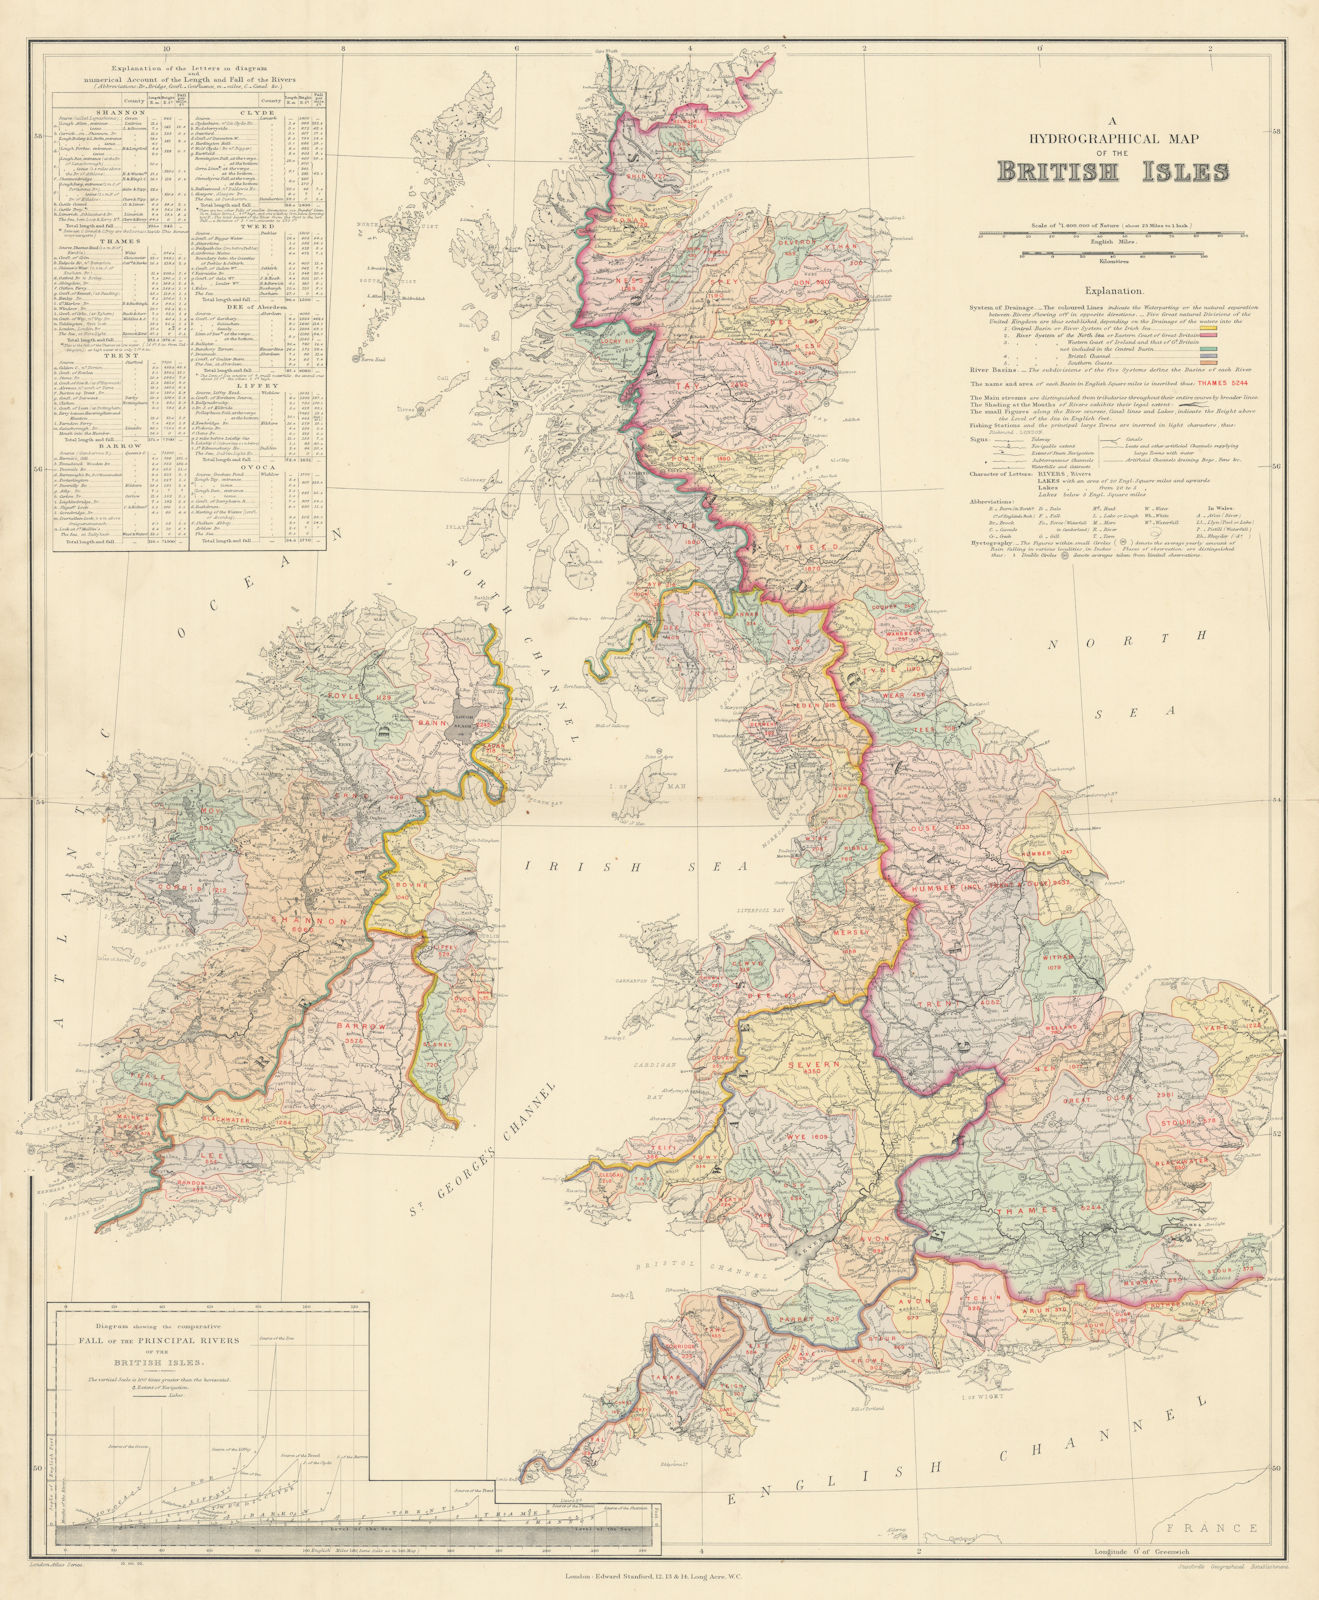 Associate Product British Isles hydrographical. Watersheds River drainage basins STANFORD 1904 map